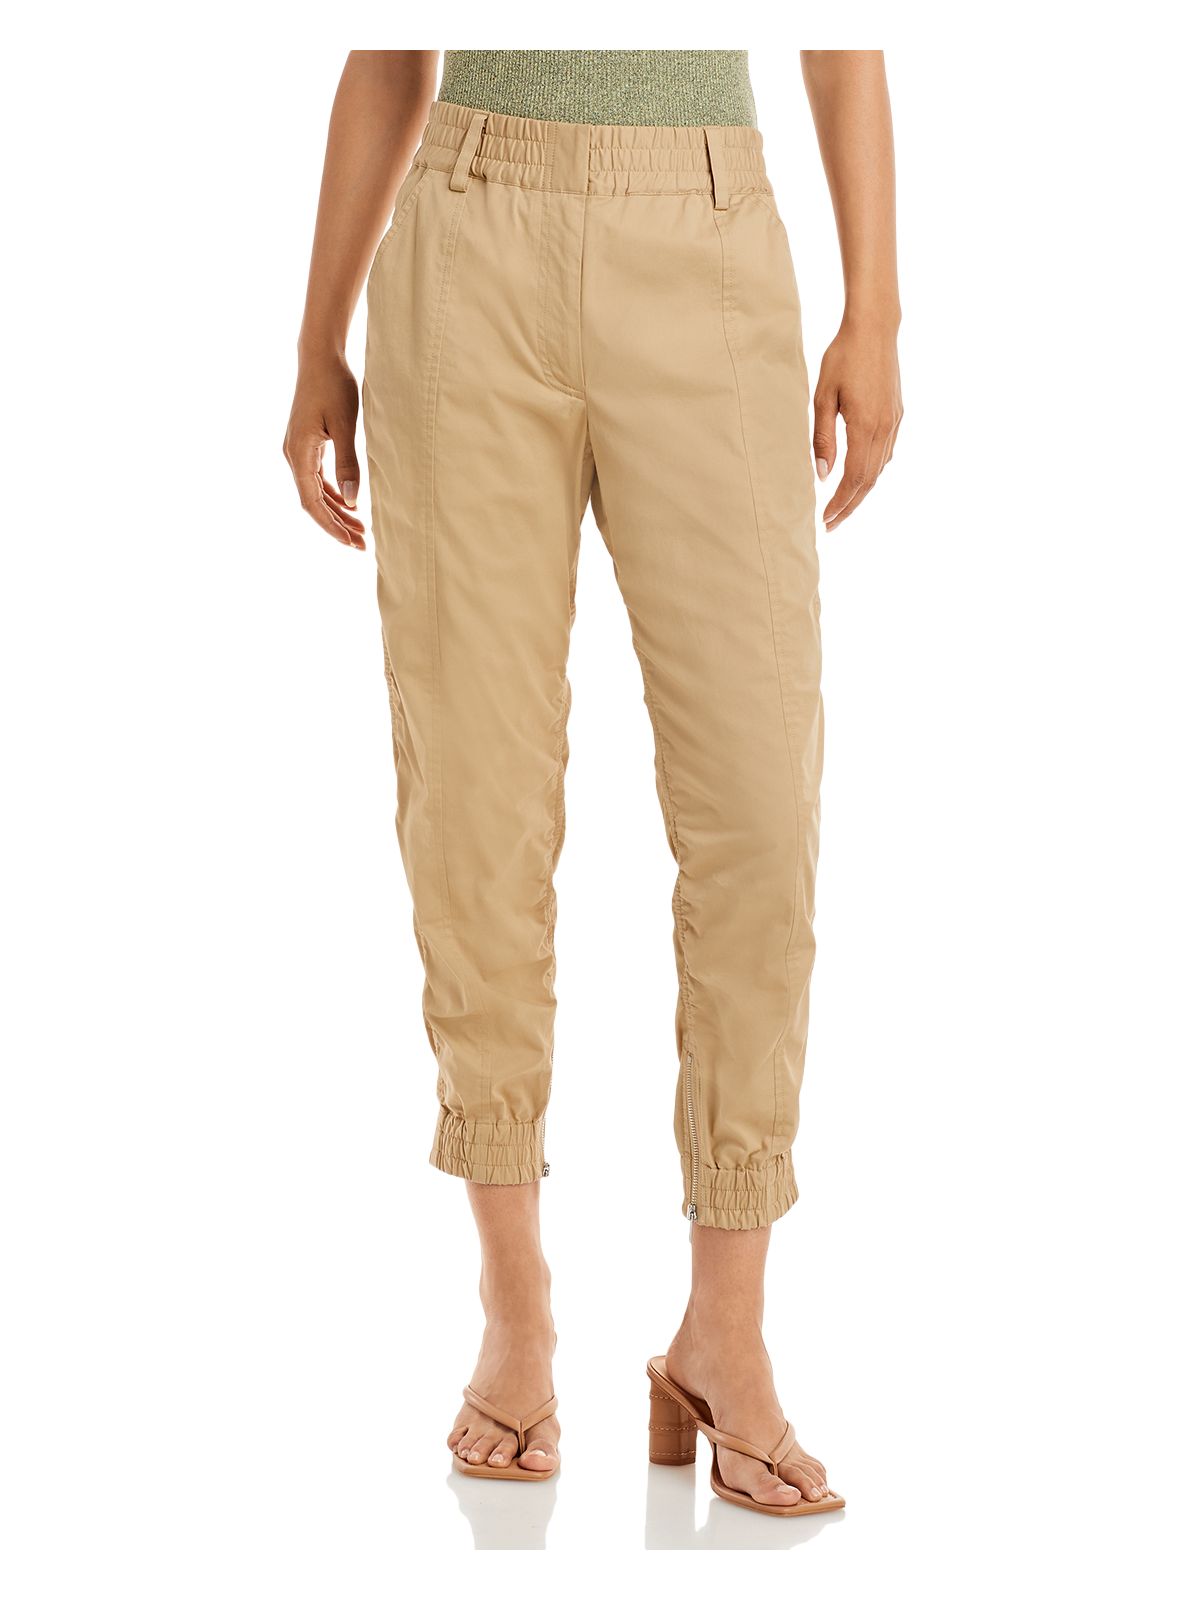 DEREK LAM 10 CROSBY Womens Beige Pocketed Zippered Front Seam Ankle Zip Jogger Pants 12